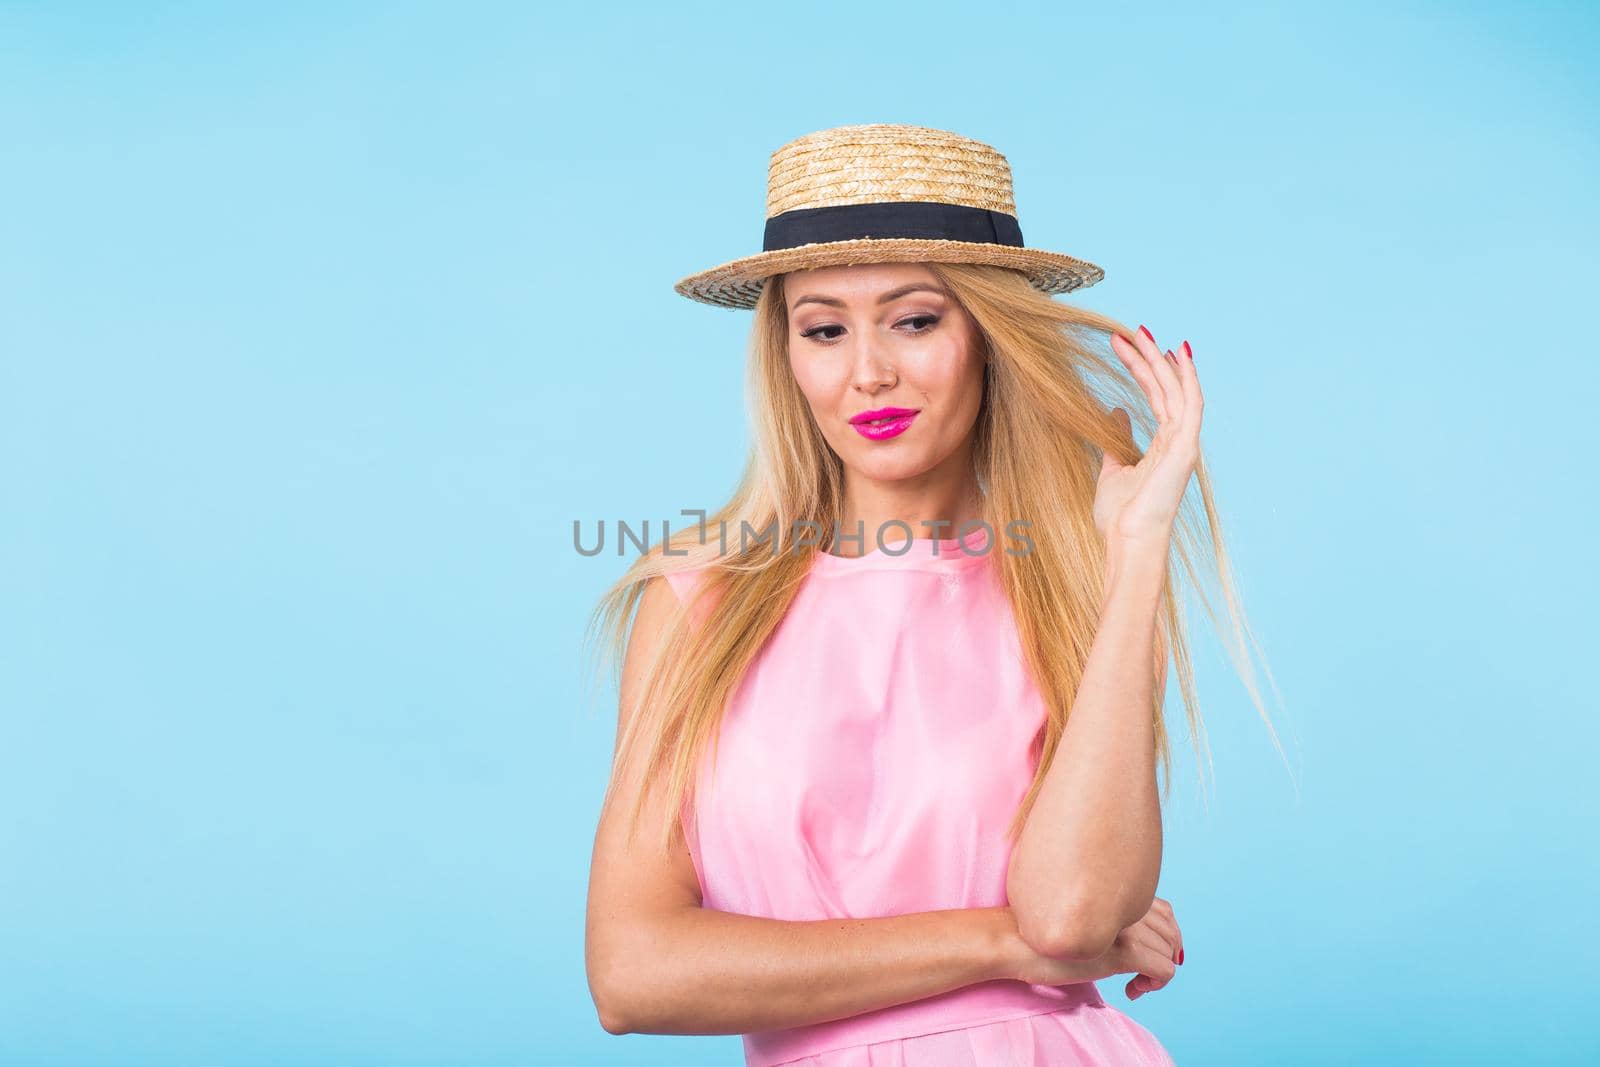 beauty fashion summer portrait of blonde woman with red lips and pink dress on blue background with copy space.